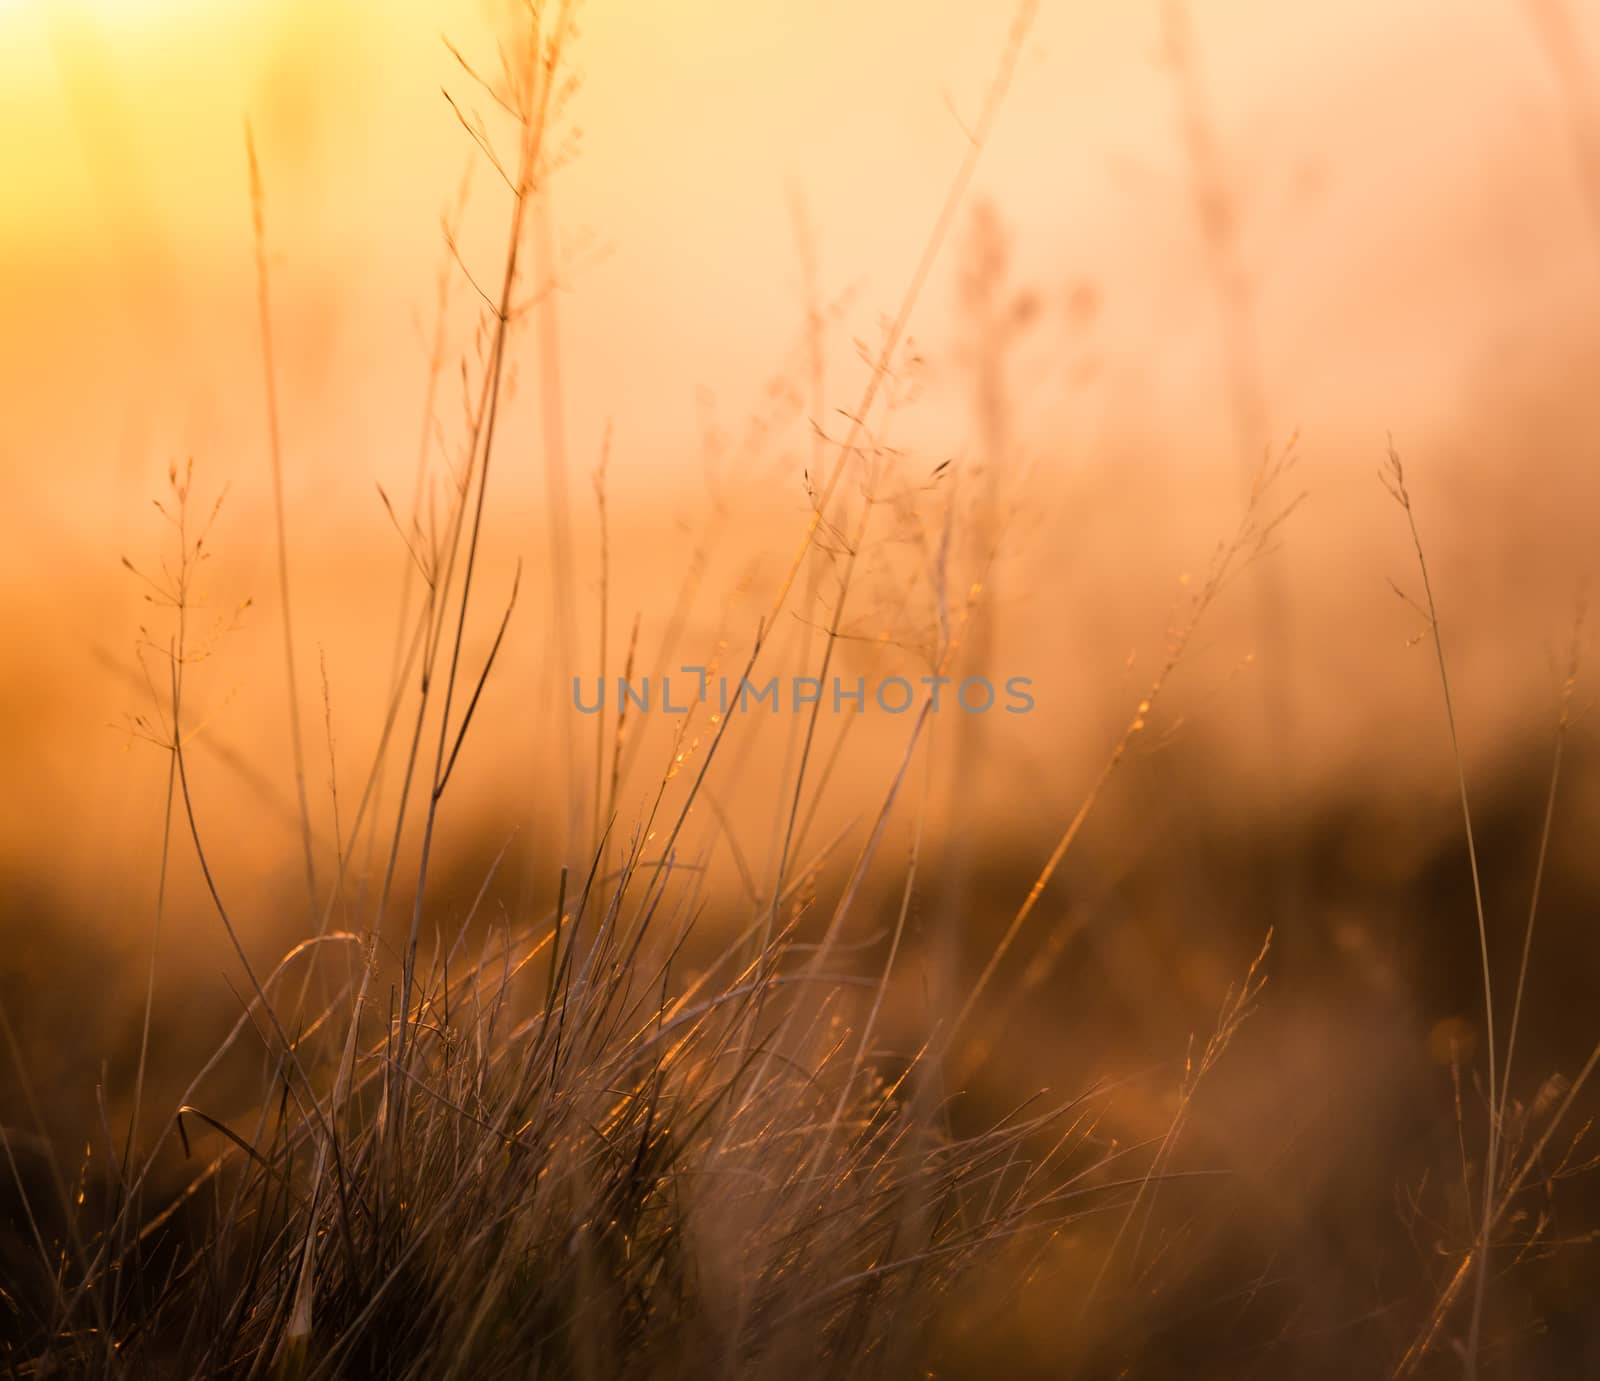 Retro Vintage Background Texture Of Shallow Focus Meadow Grass At Sunset